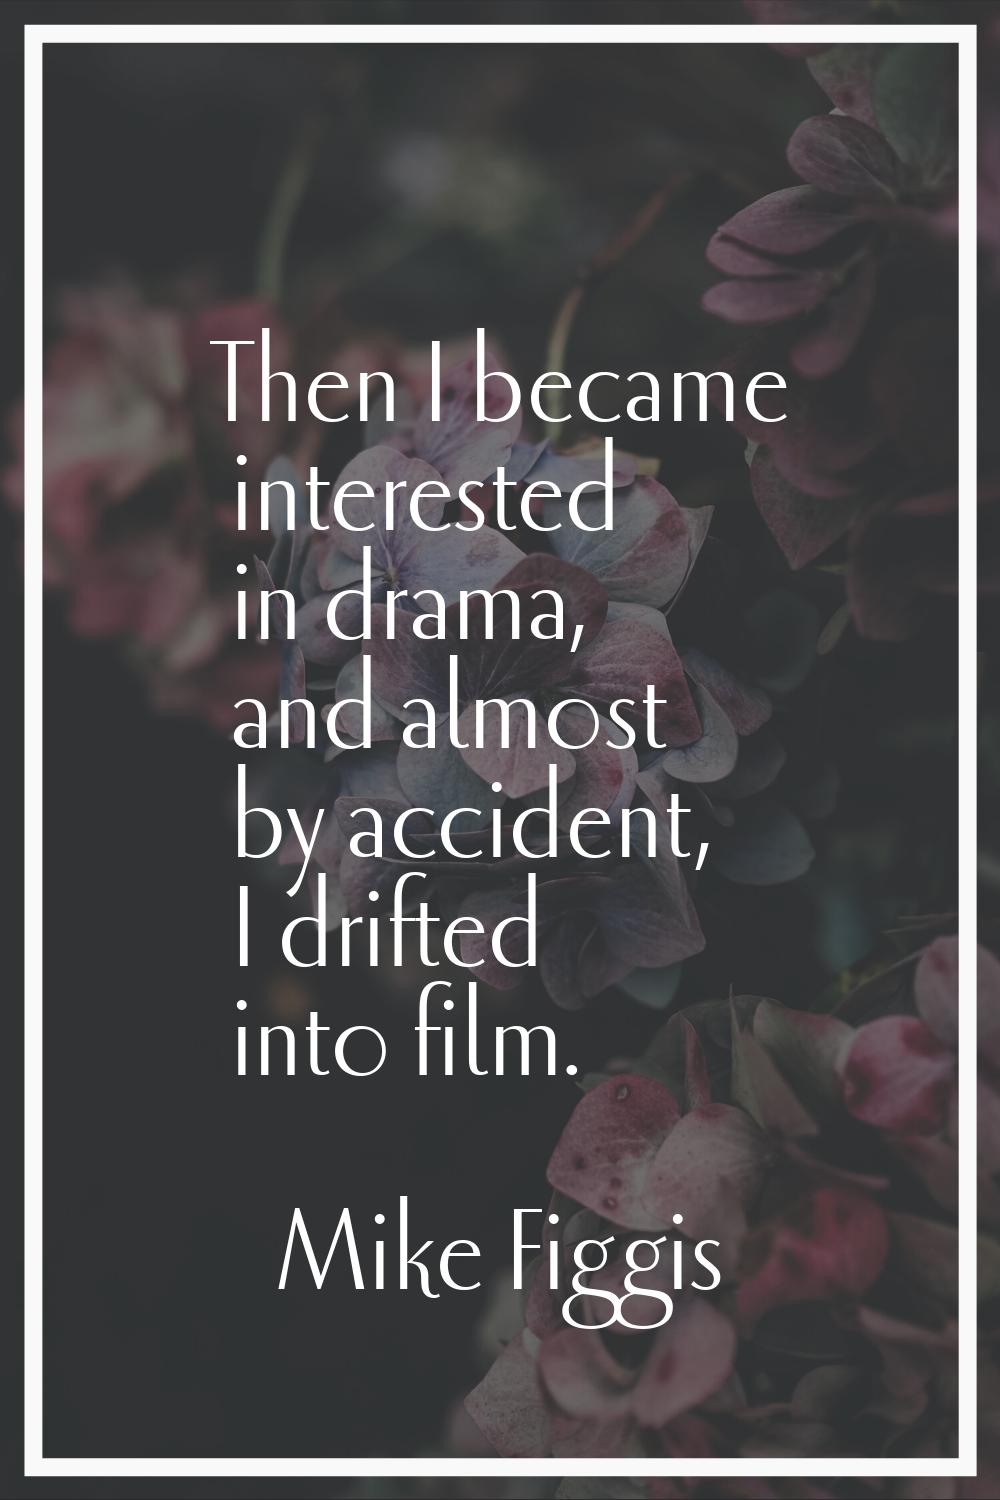 Then I became interested in drama, and almost by accident, I drifted into film.